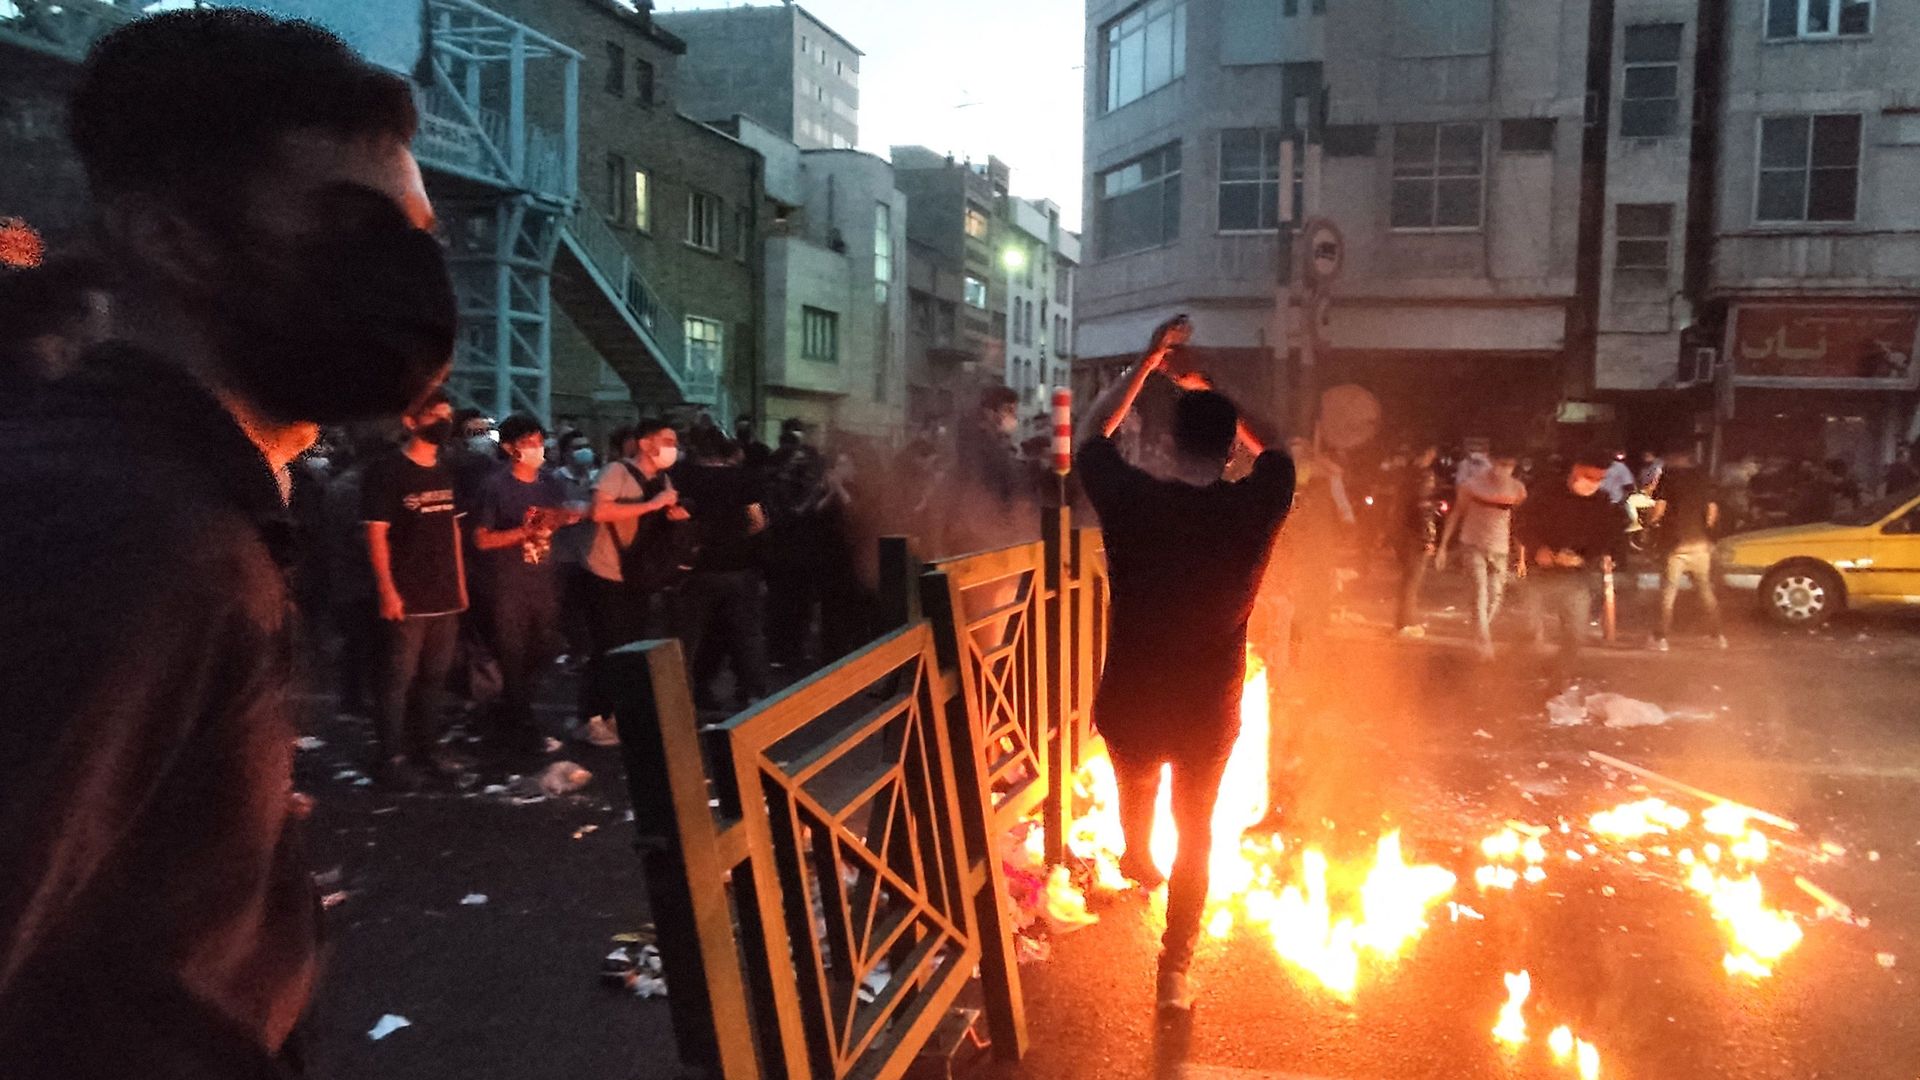 Demonstrators around a fire in Tehran on Sept. 21.